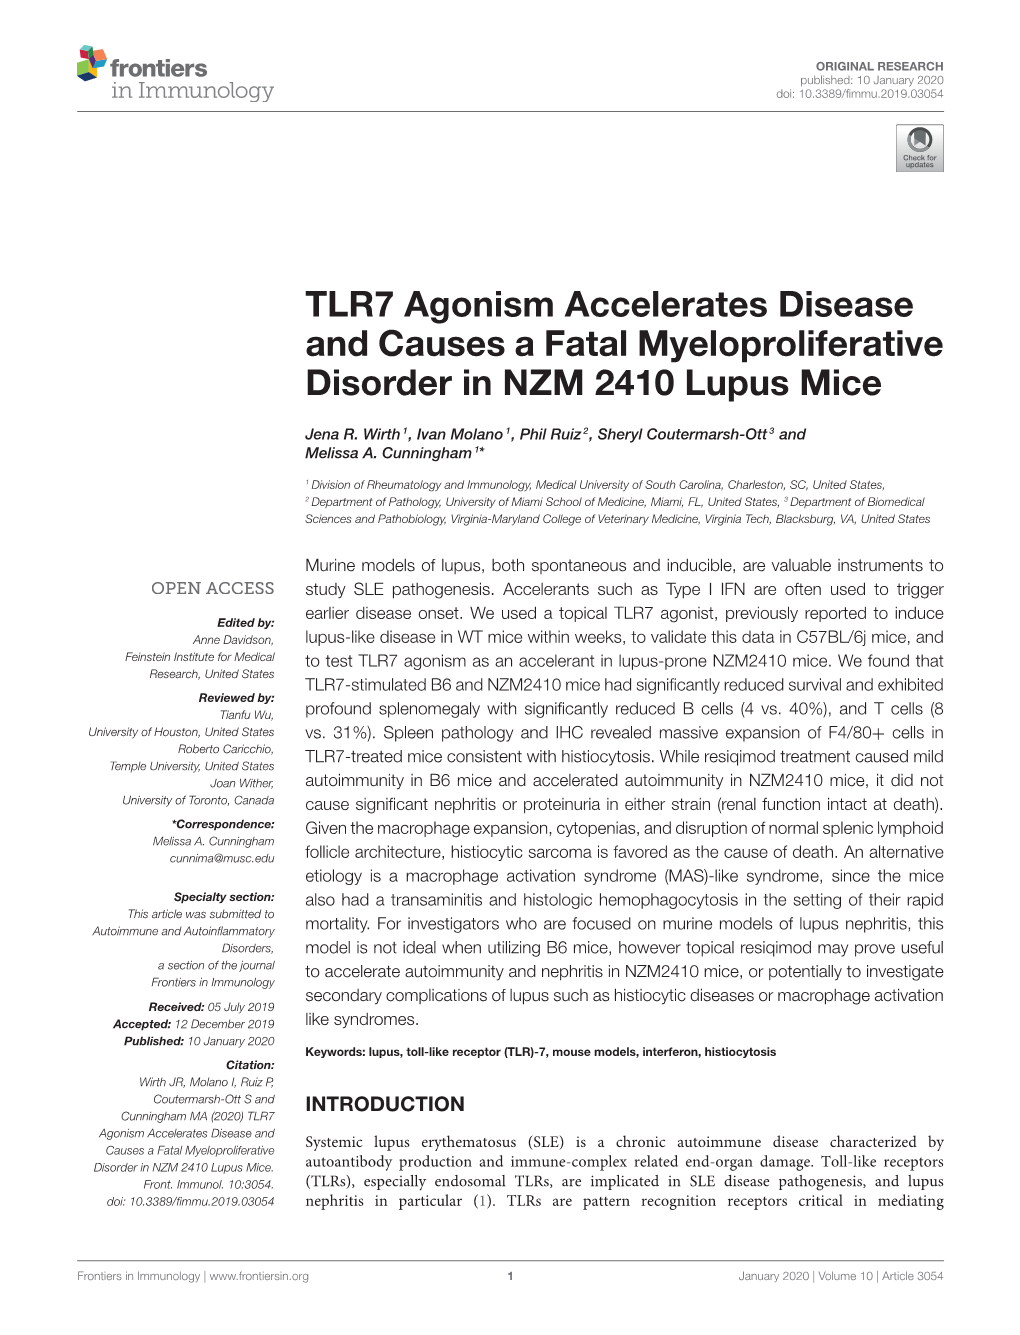 TLR7 Agonism Accelerates Disease and Causes a Fatal Myeloproliferative Disorder in NZM 2410 Lupus Mice